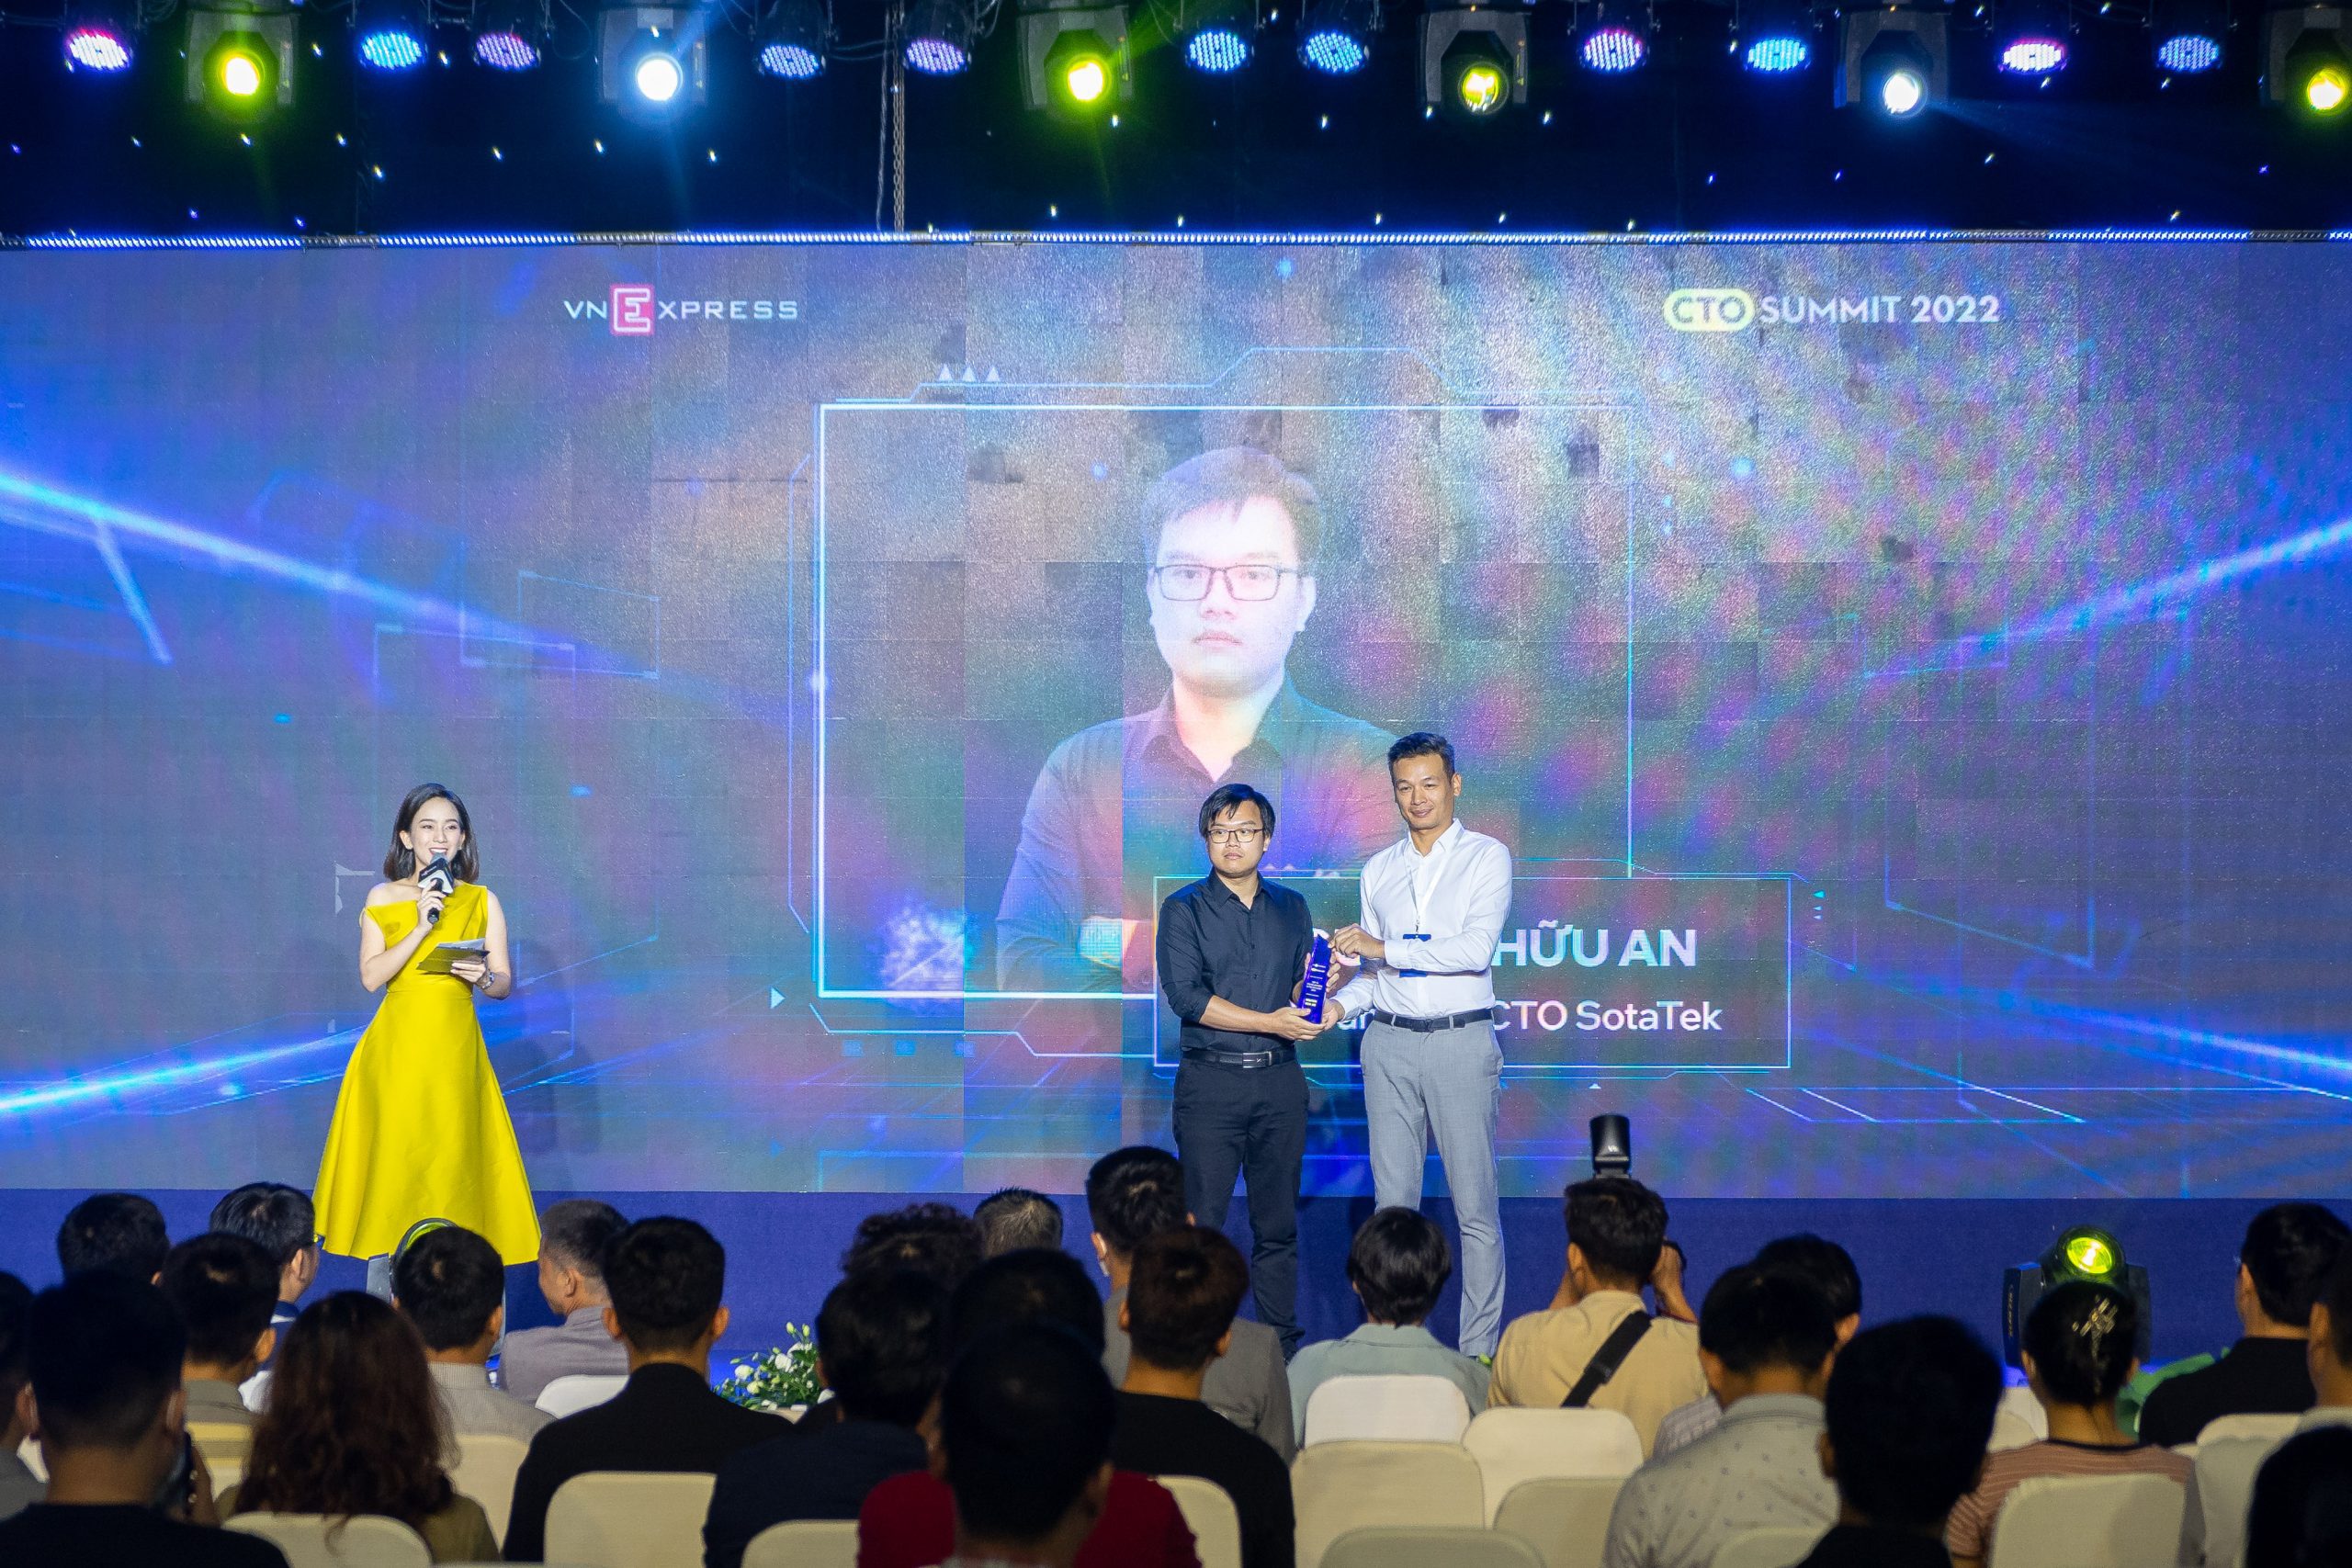 Mr. Andy Nguyen is among Top 10 Young Leaders in the Technology field